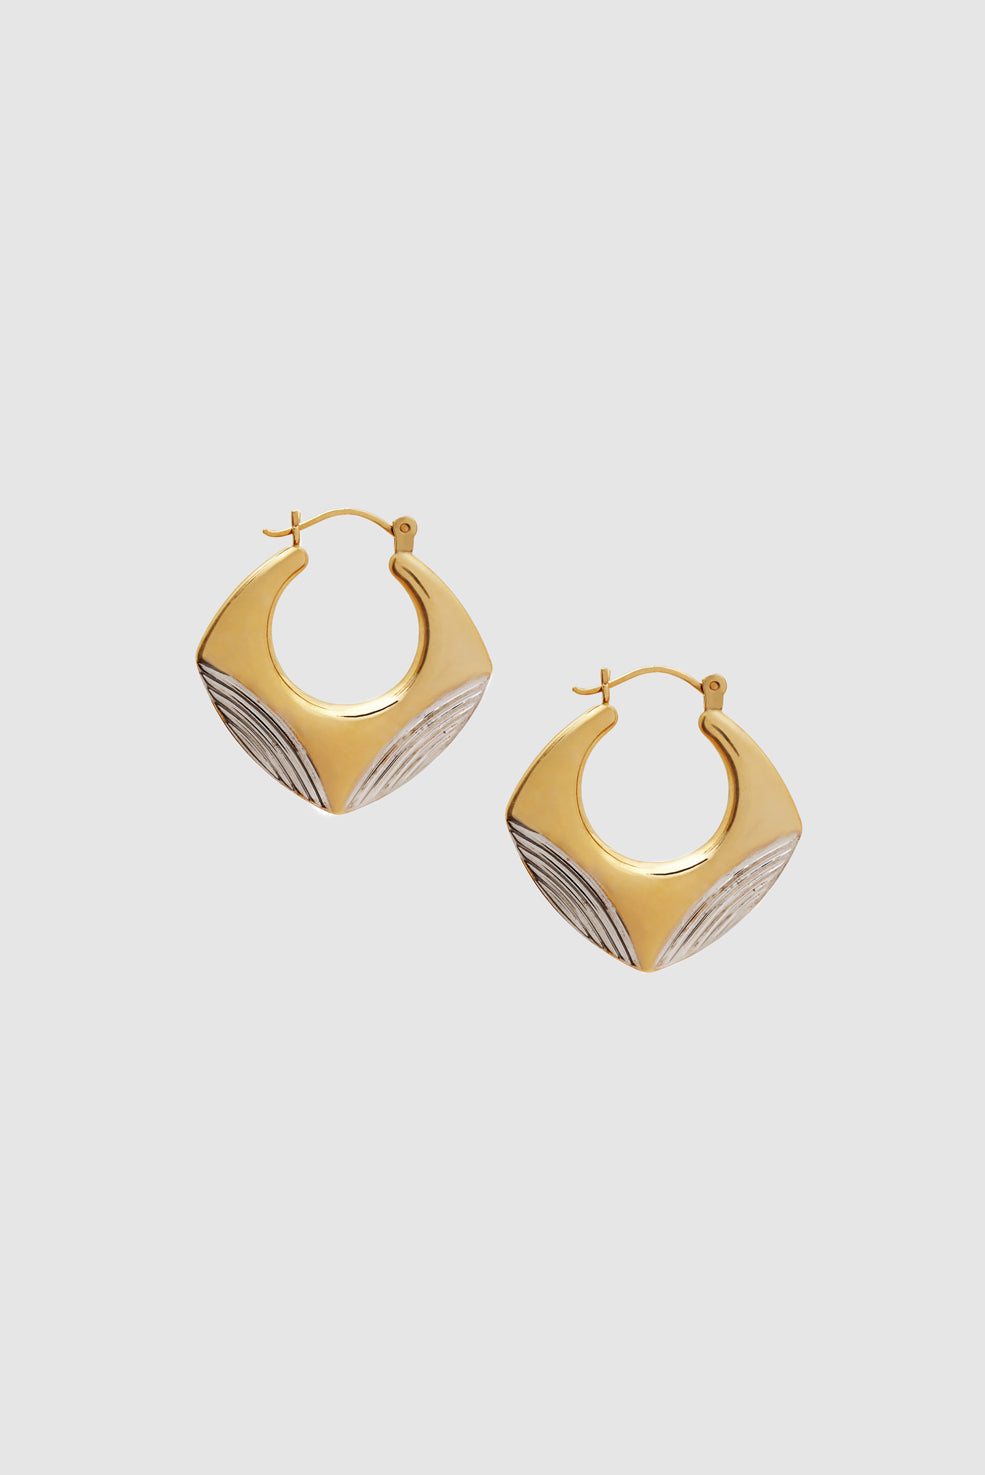 ANINE BING Two Tone Squared Hoop Earrings - 14K Gold - Front View